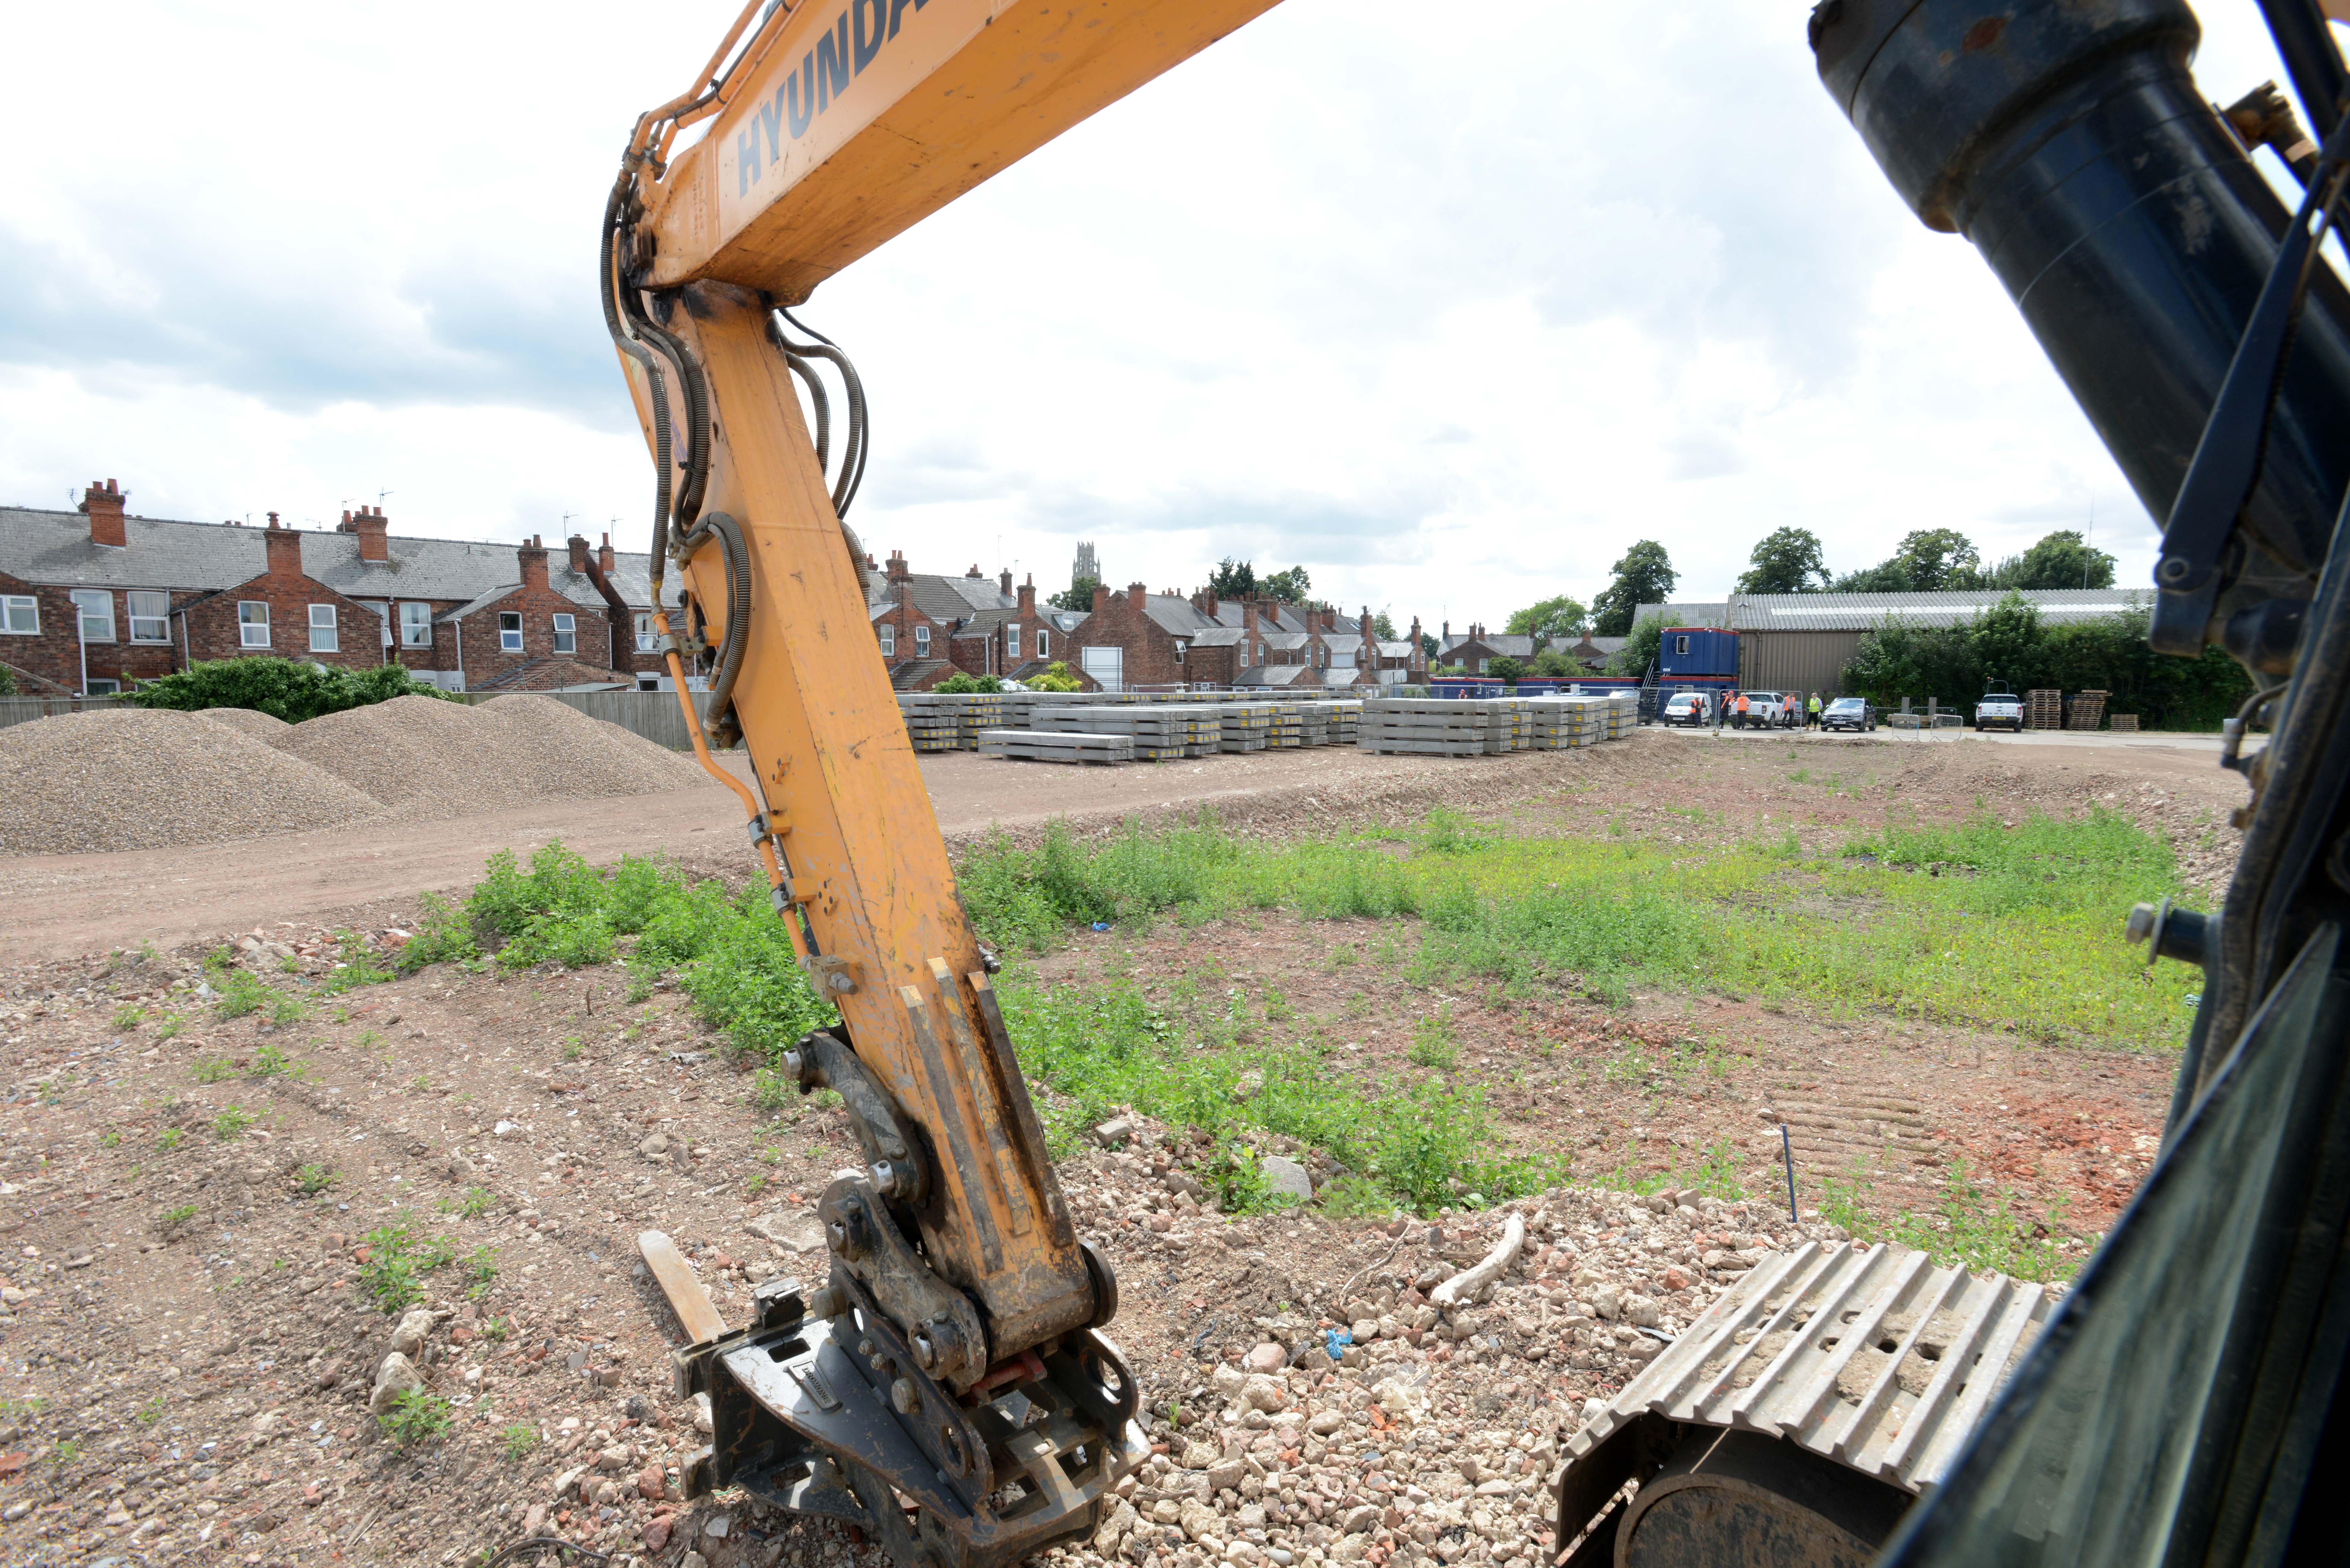 Photograph showing construction machinery on the site of our Caxton Place development in Boston